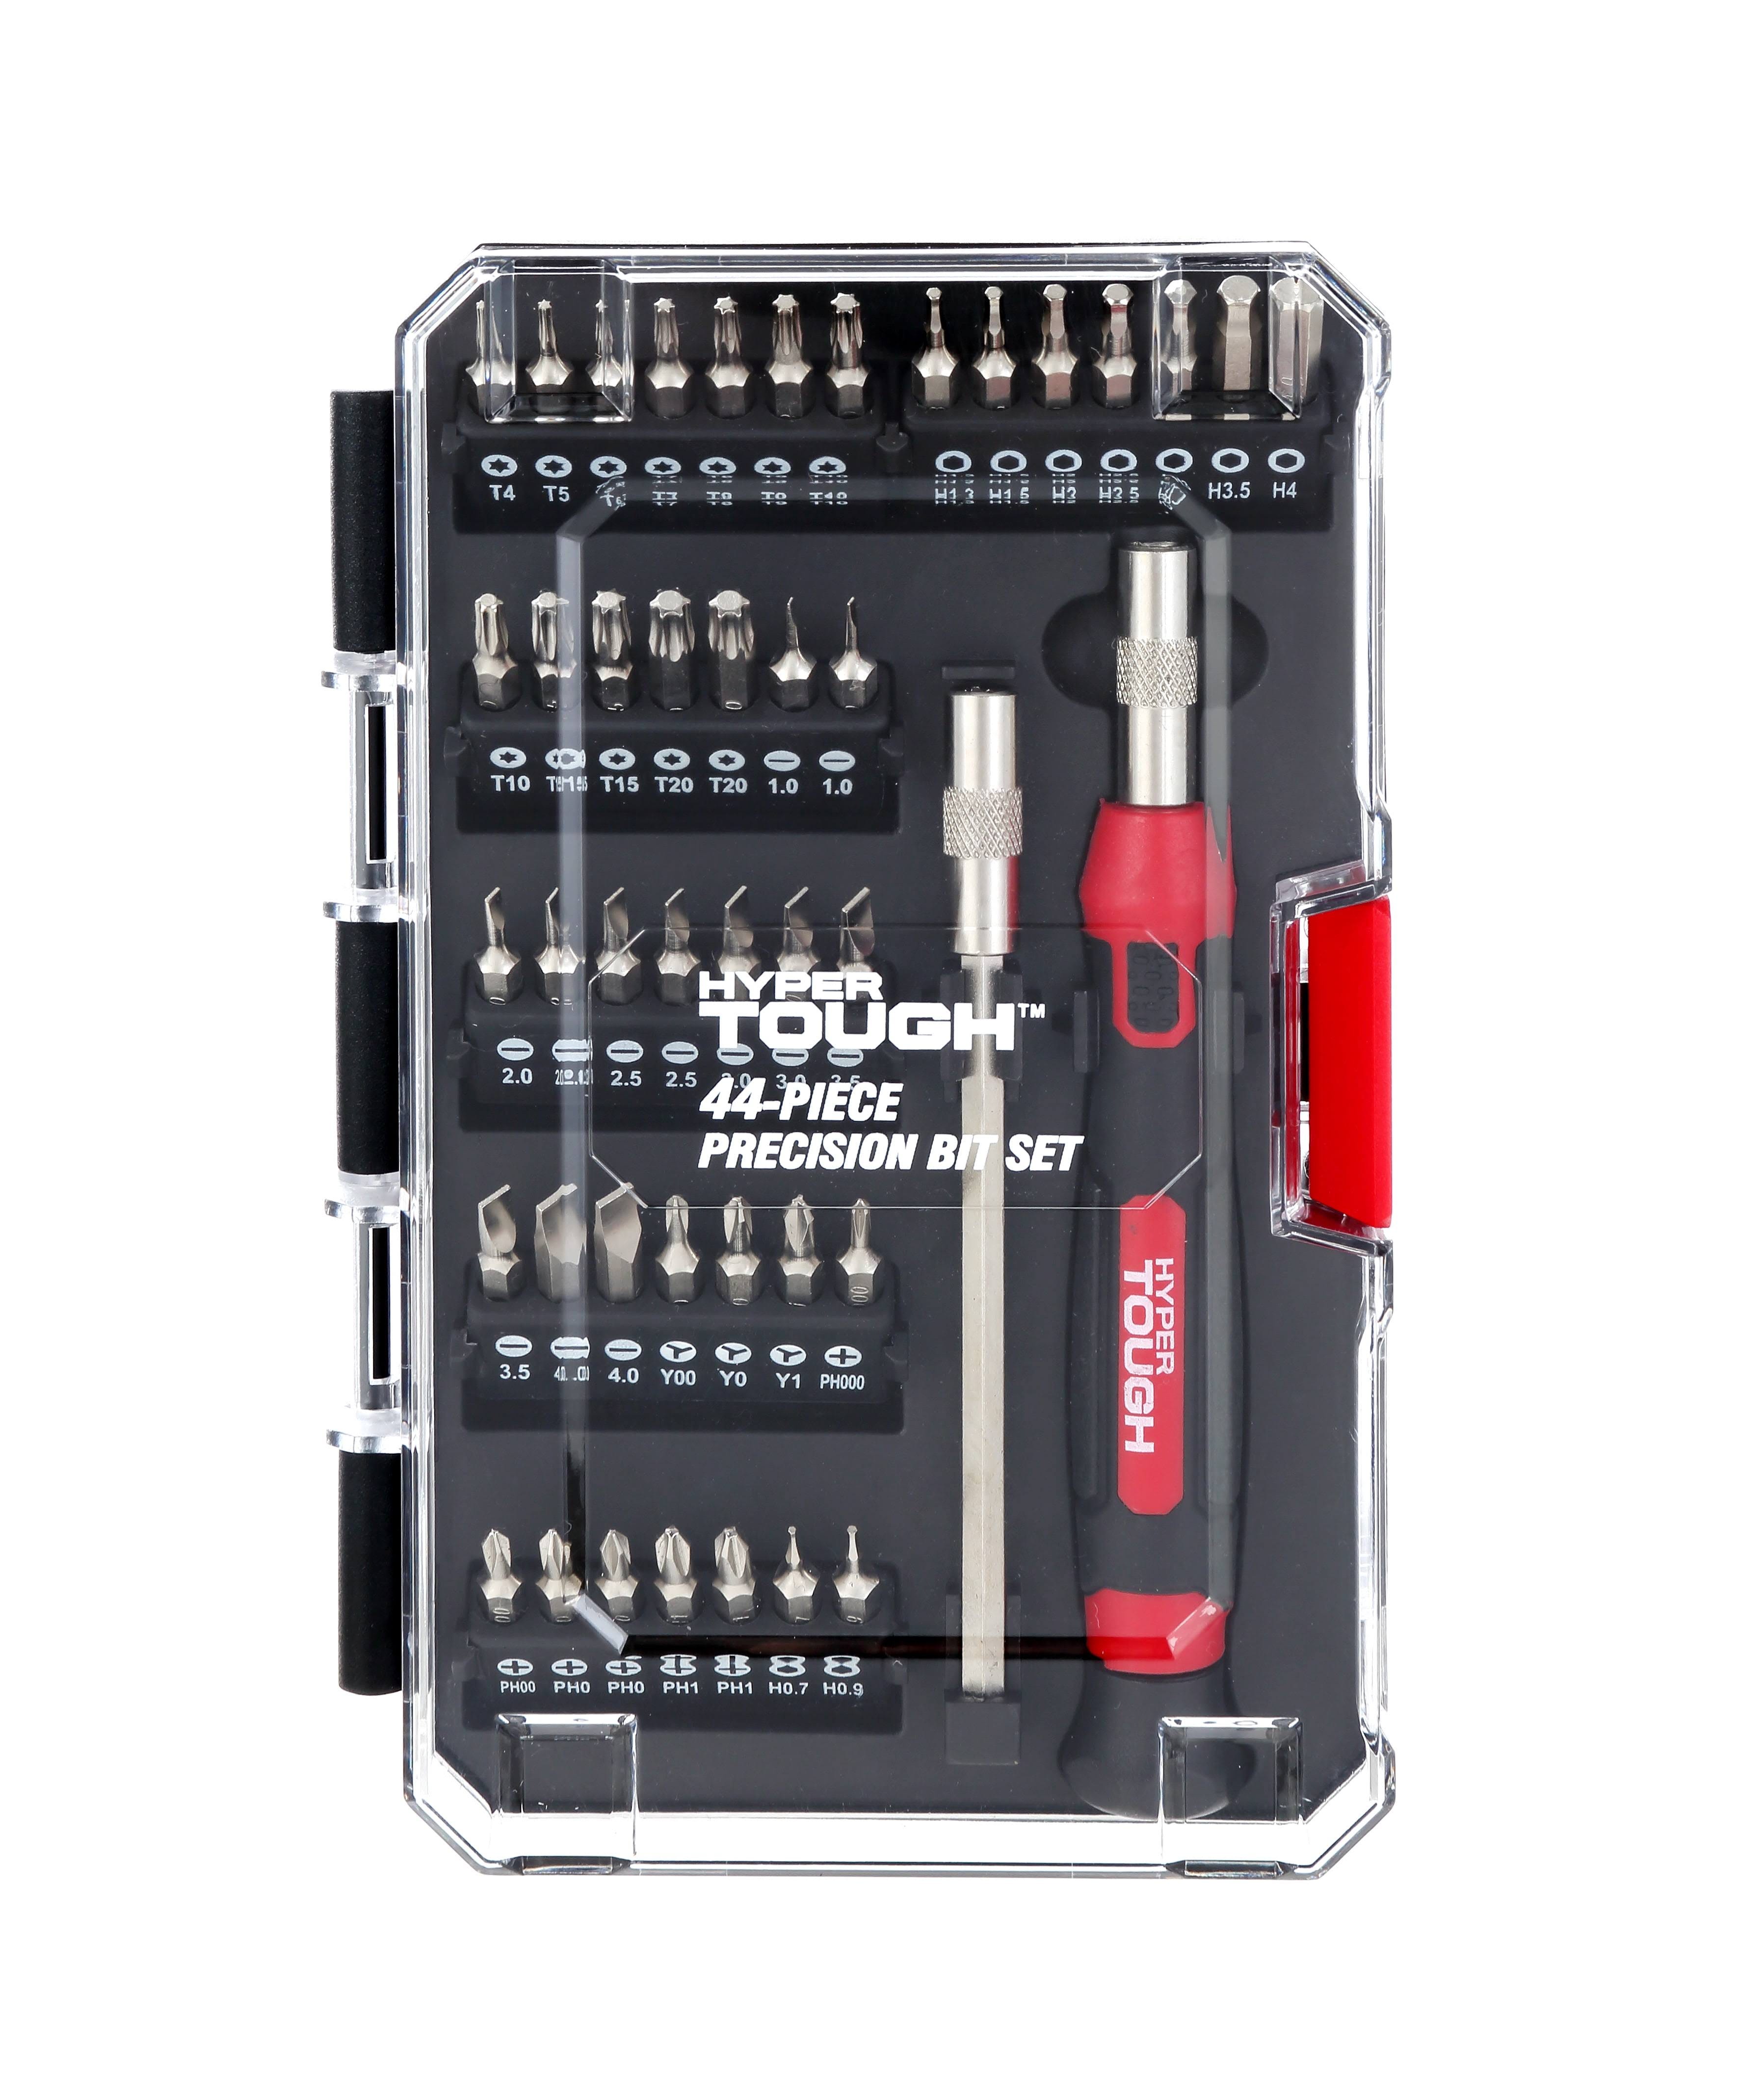 Hyper Tough 44-Piece Precision Screwdriver Bits Set: Perfect for Home Repairs and DIY Projects | Image